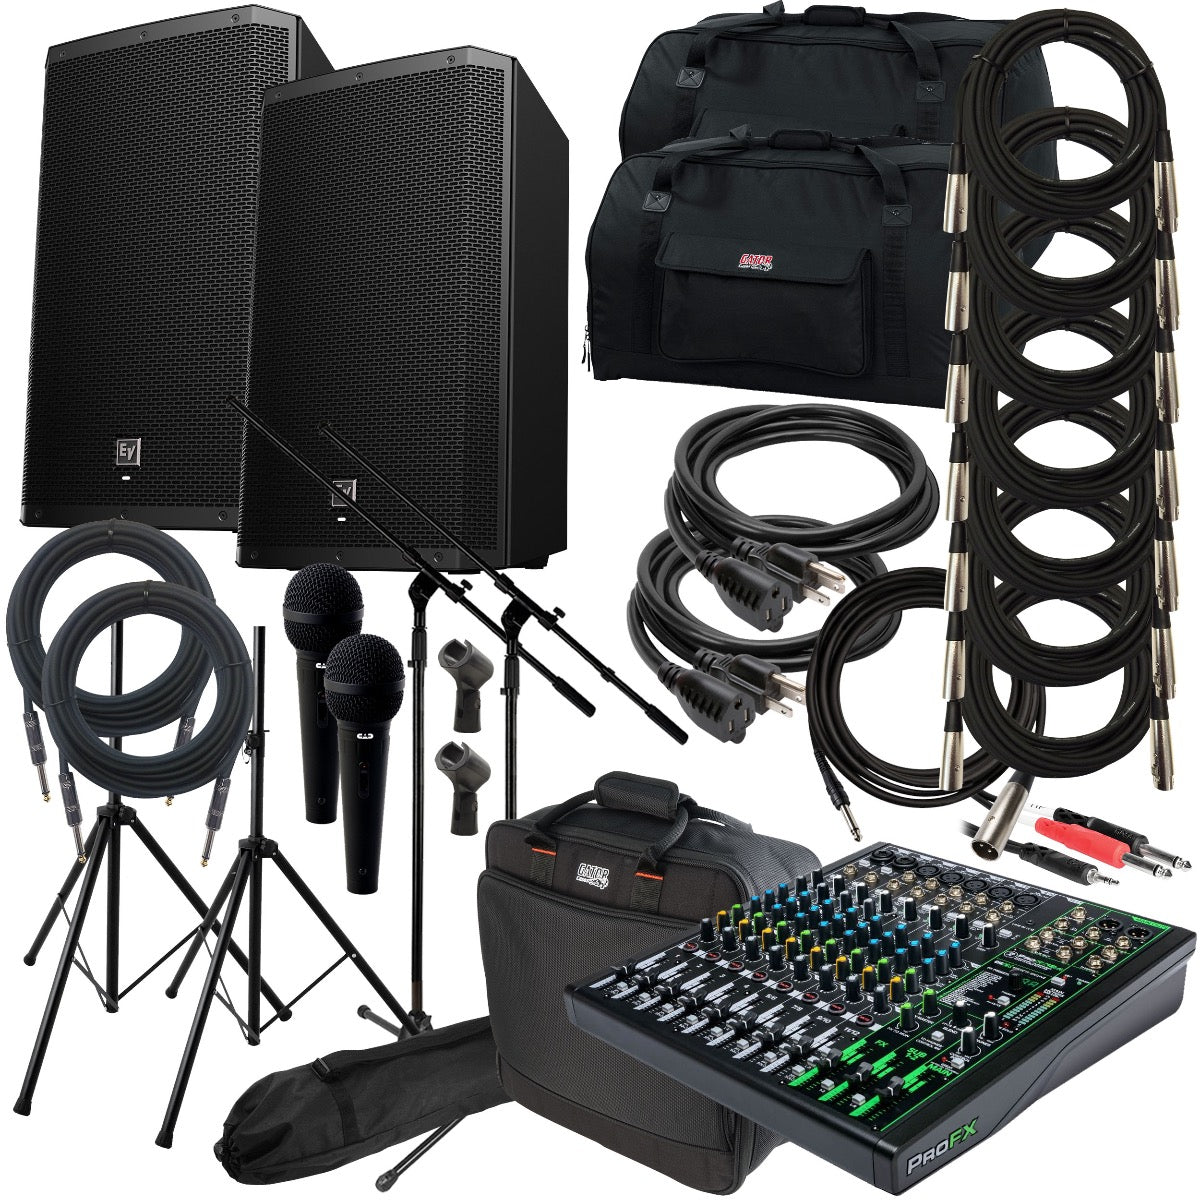 Collage of the Electro-Voice ZLX-15BT 15" Powered Loudspeaker COMPLETE AUDIO BUNDLE showing included components